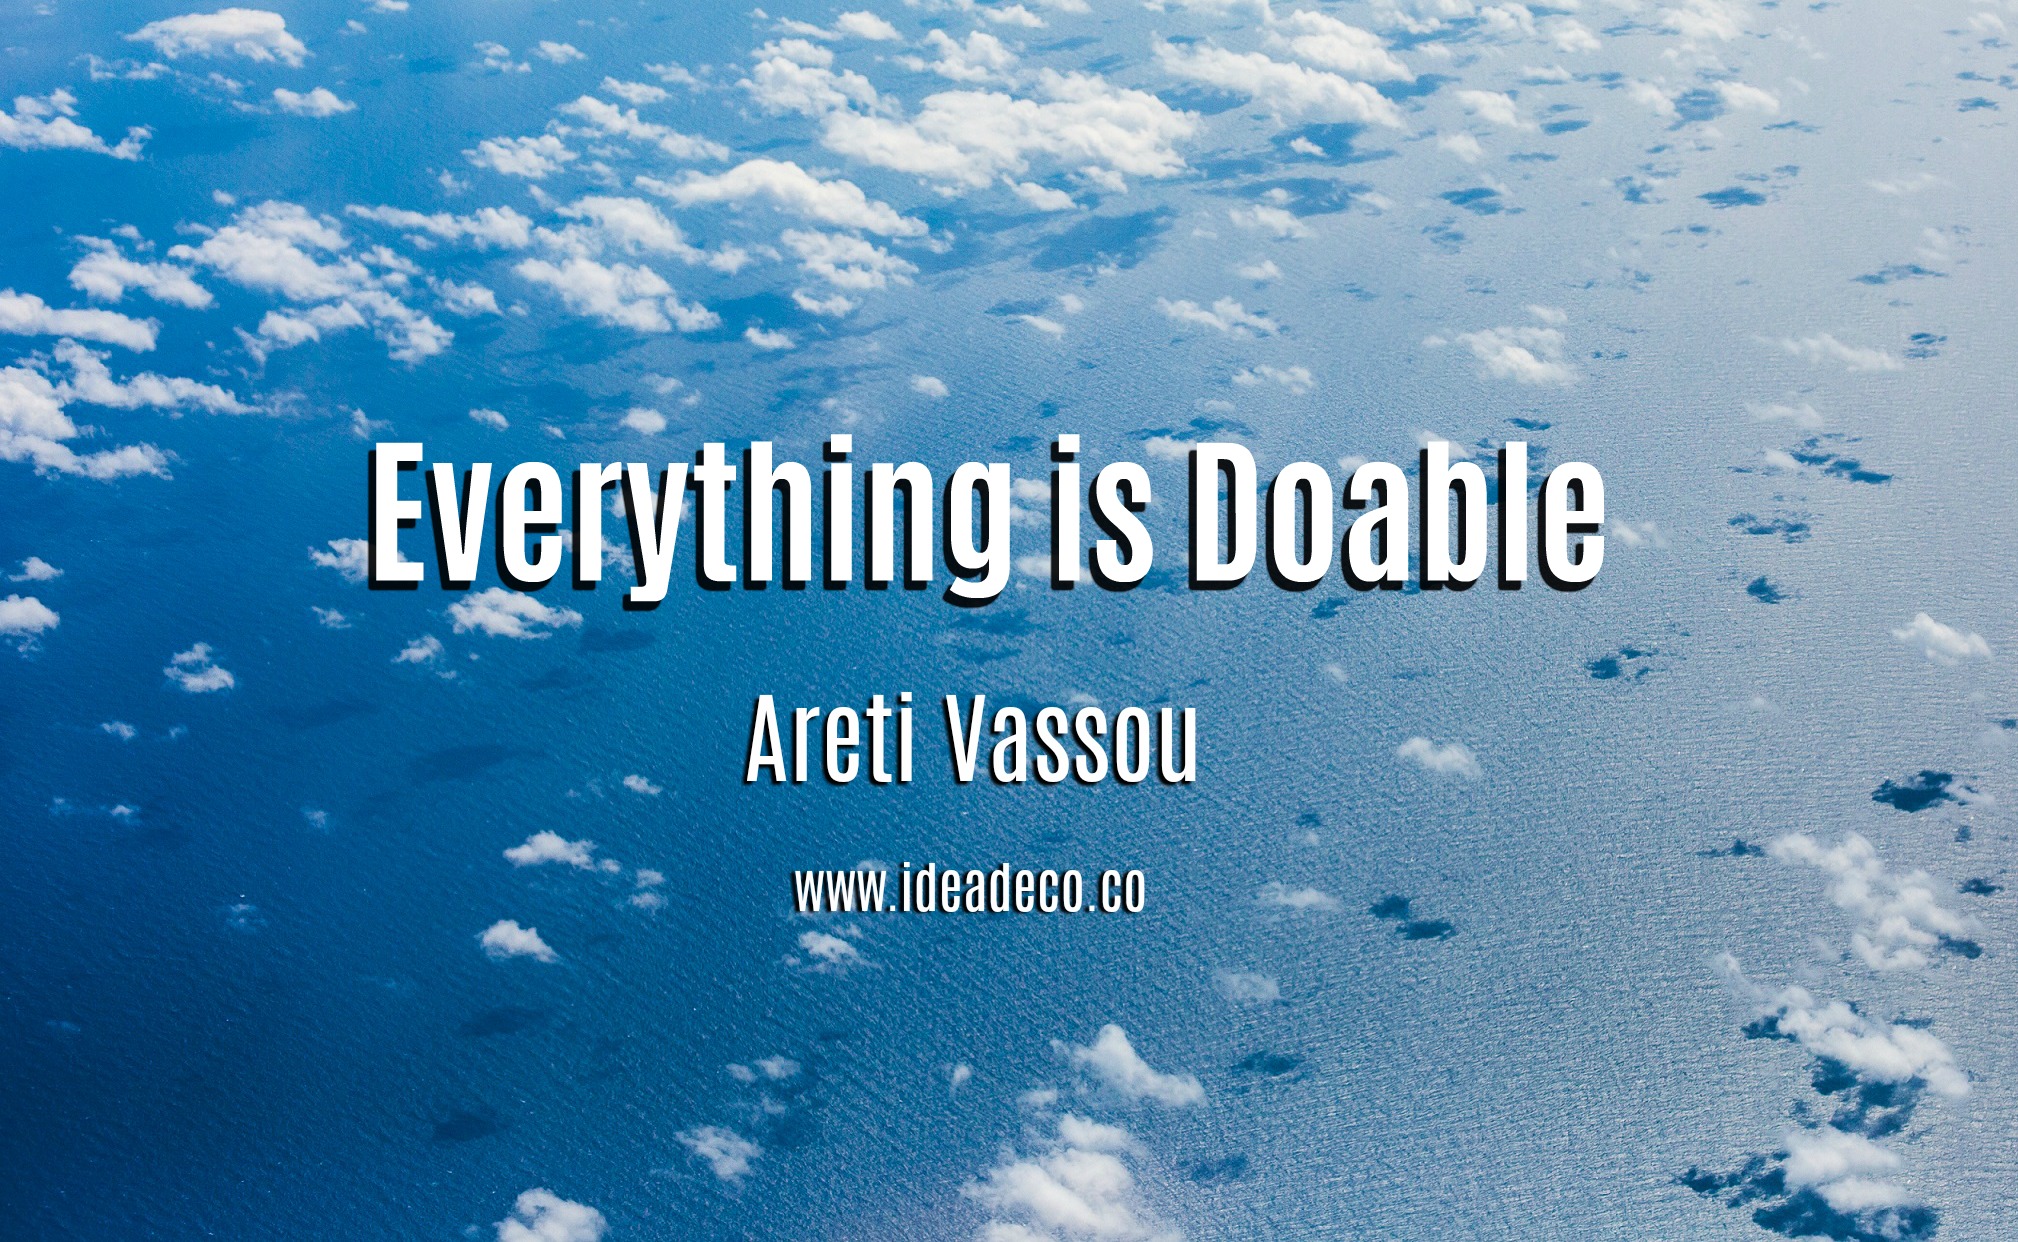 Everything is Doable by Areti Vassou Ideadeco 